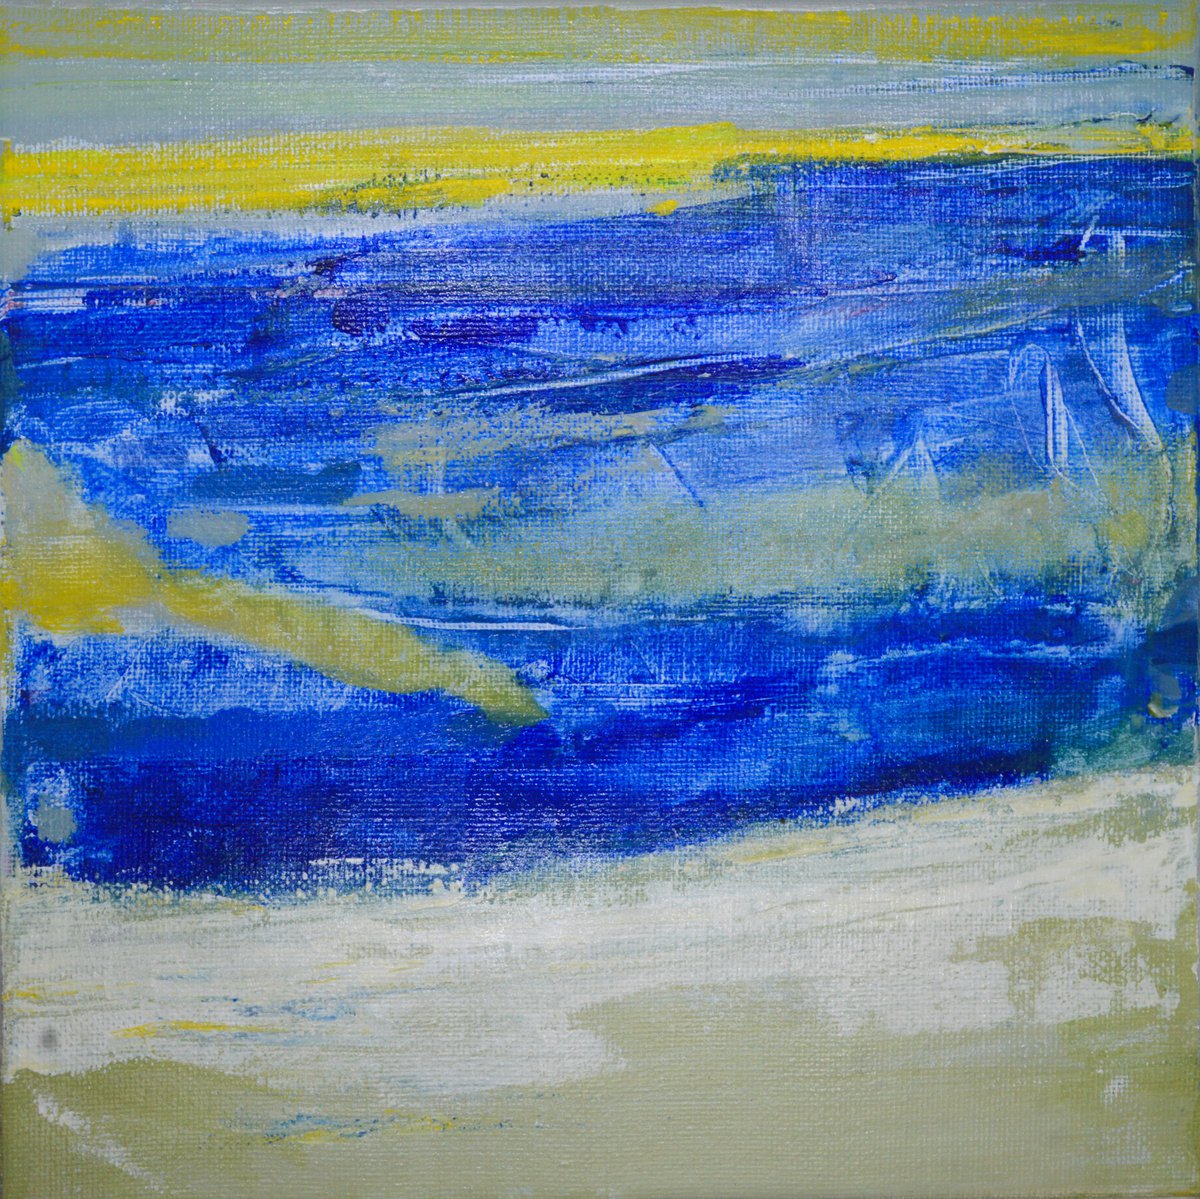 Abstract Landscape Blue and Yellow by Cristian Valentich